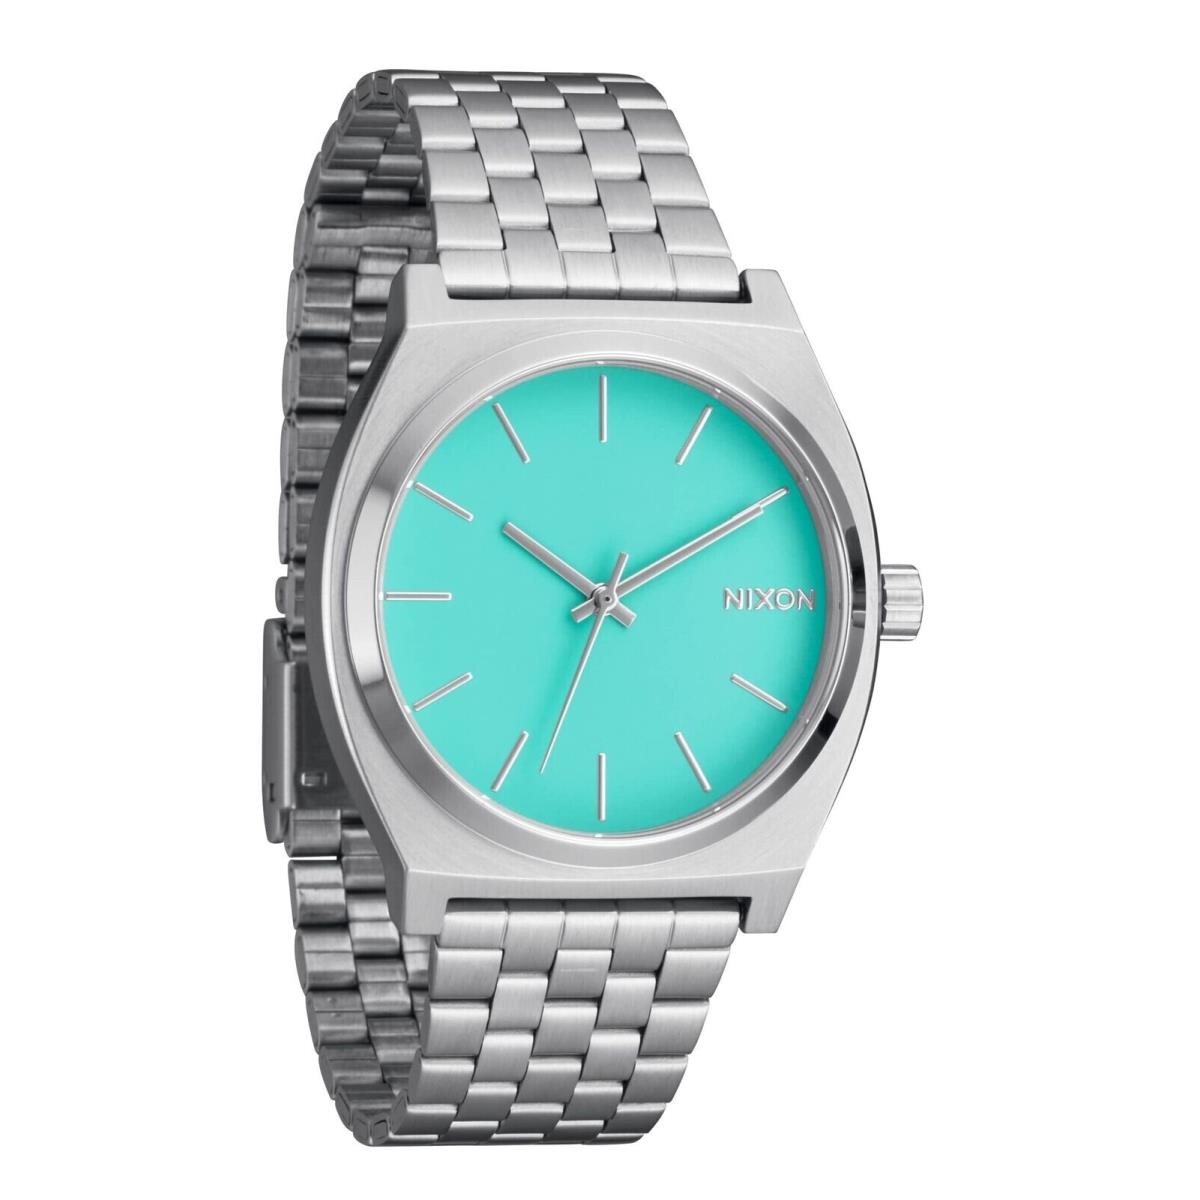 Nixon Time Teller A045 - Silver/turquoise - 100m Water Resistant Men`s Analog